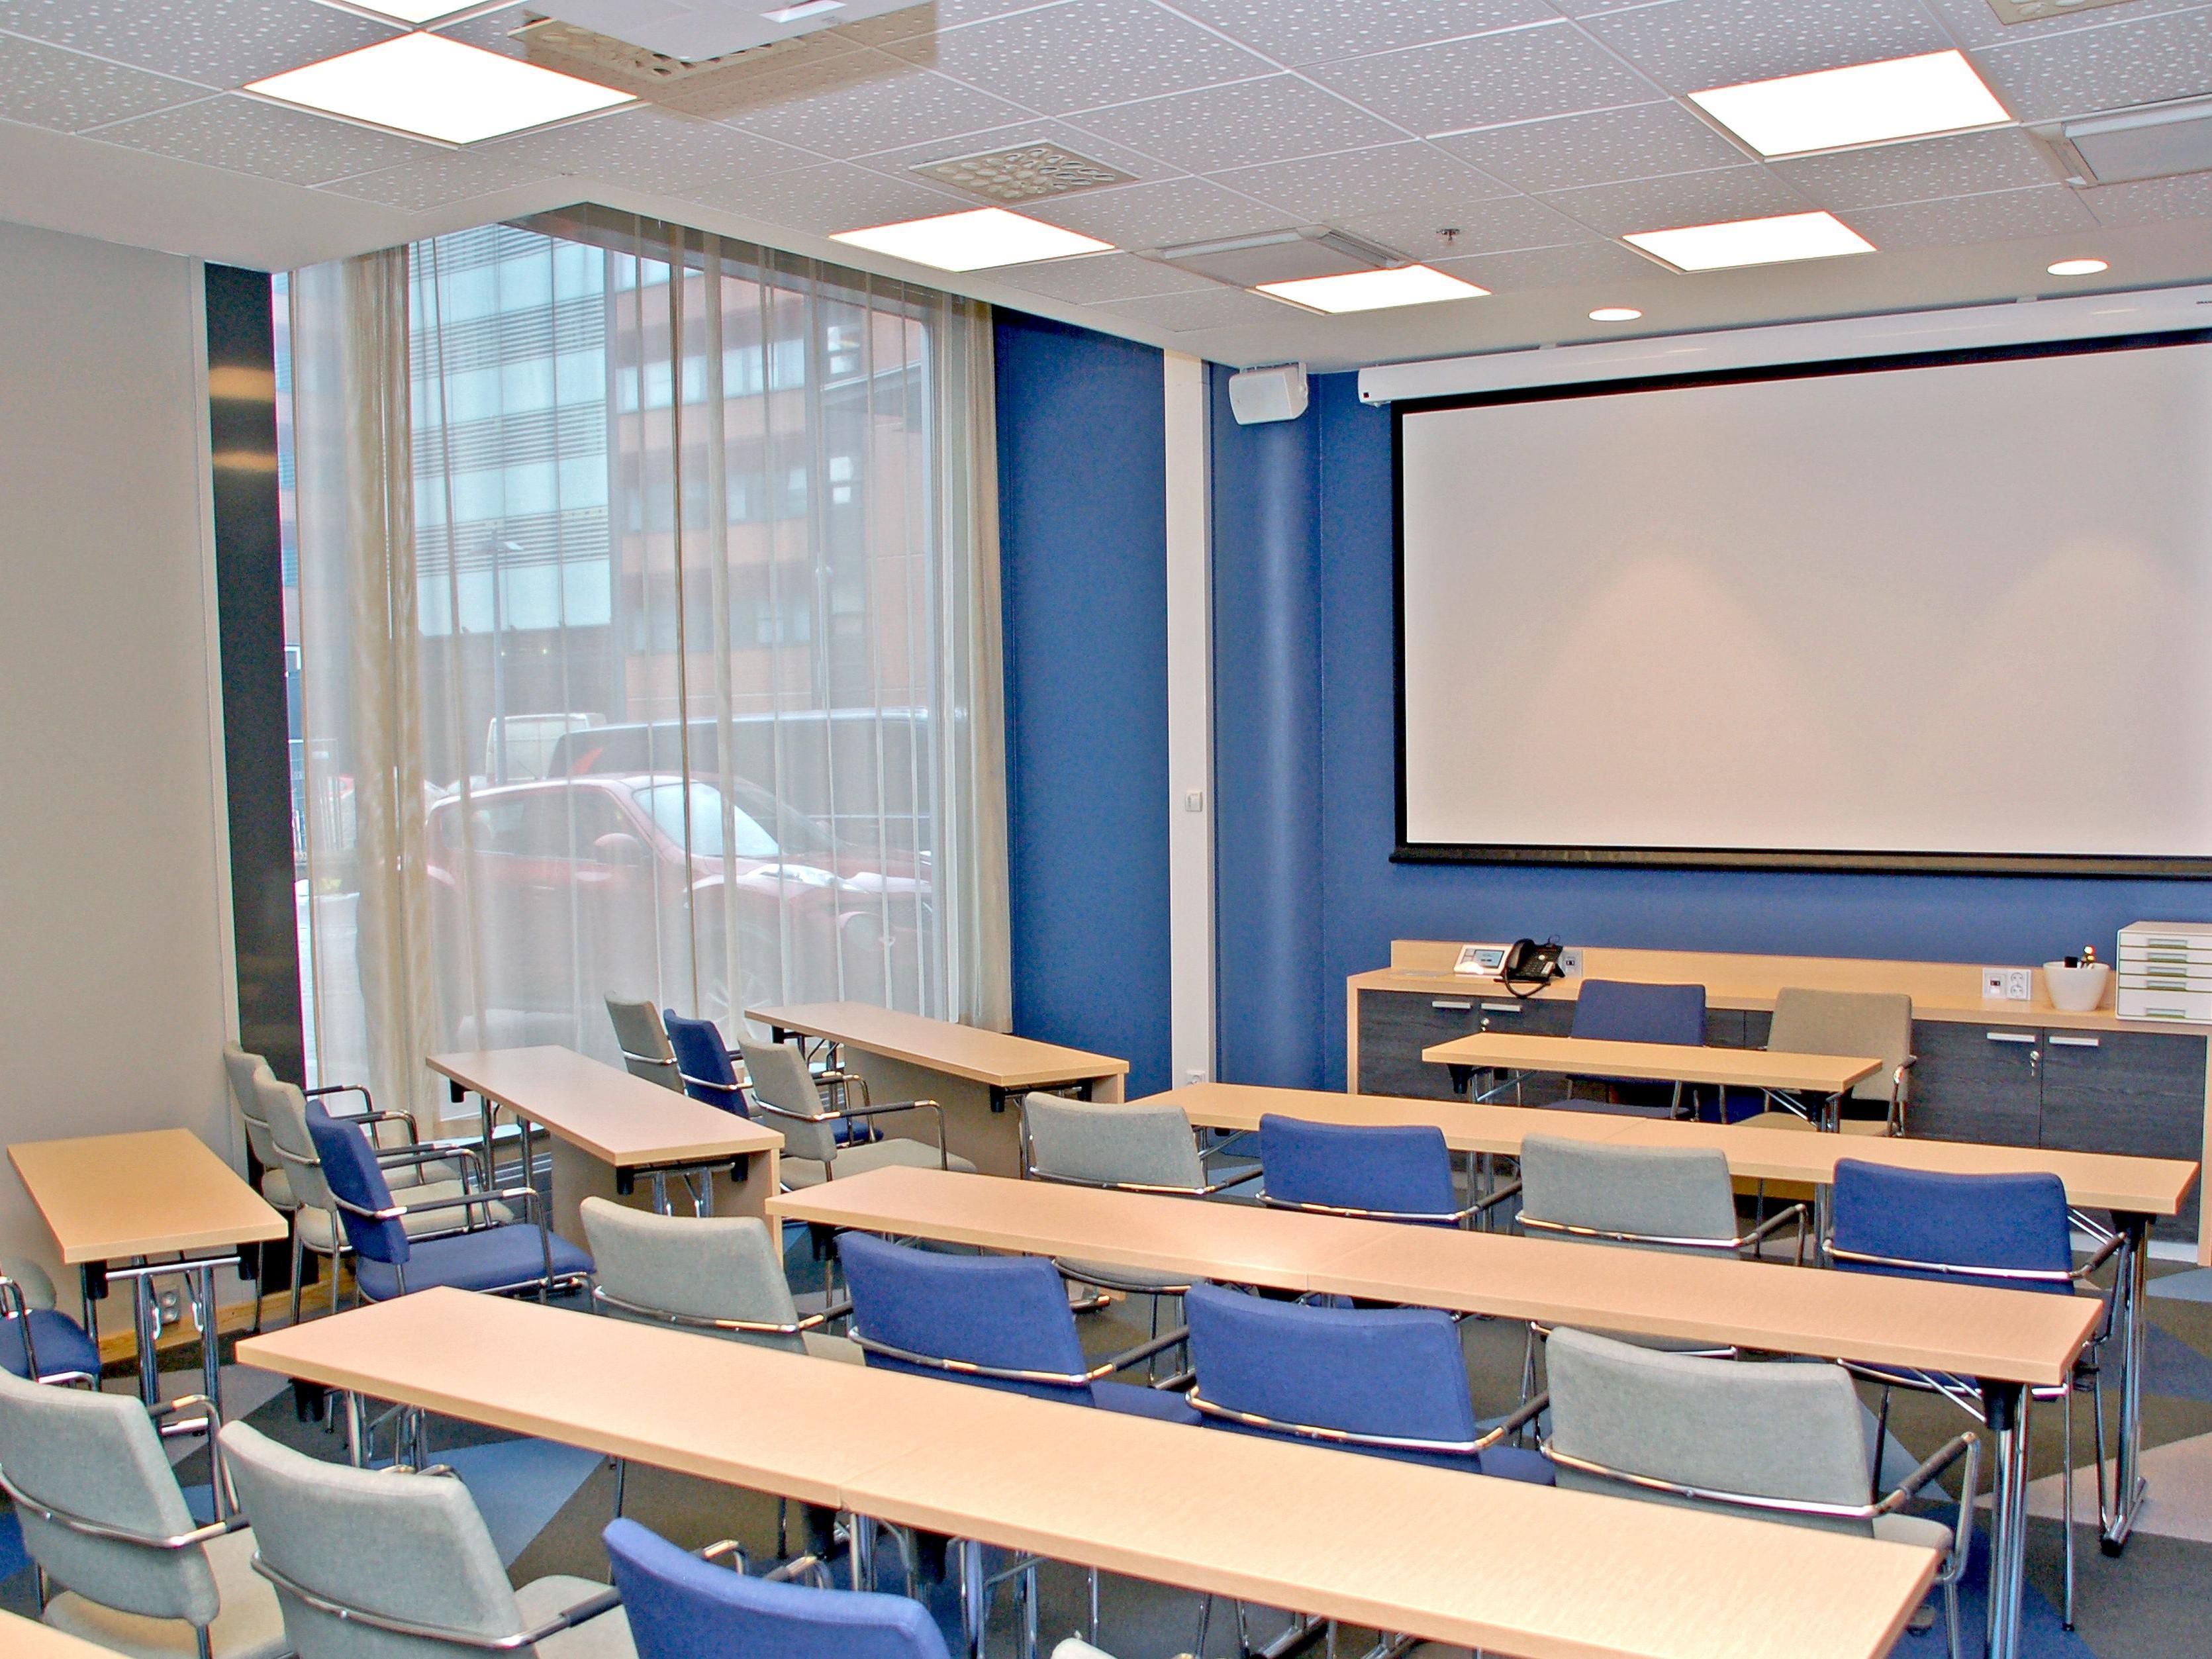 Did you know that you can hold an effective meeting in our multifunctional meeting room, which can serve up to 24 guests? Contact our sales at holidayinnhelsinki.fi for more information or take a tour at our 360 show. You can also hold a small relaxed get-together-party at out Break Out Lounge. 